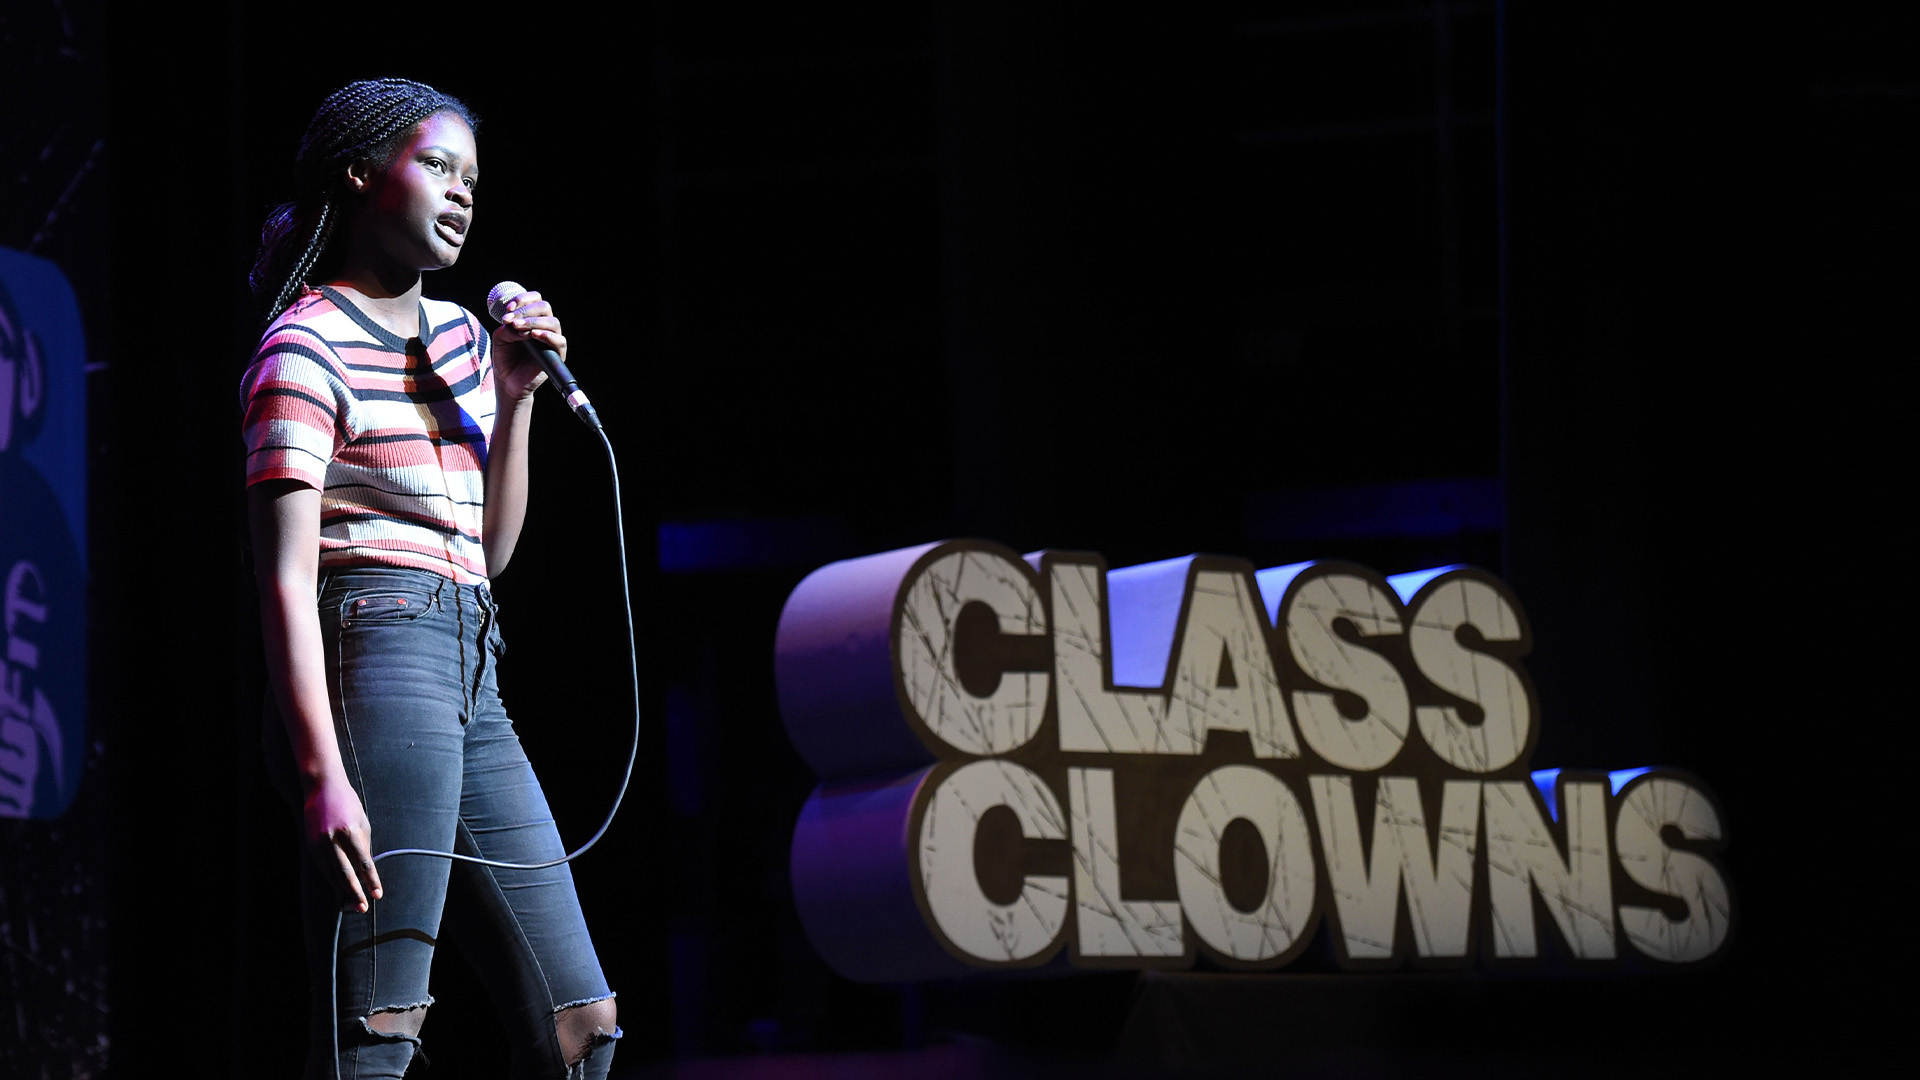 Young Comedian competing in Class Clowns on stage